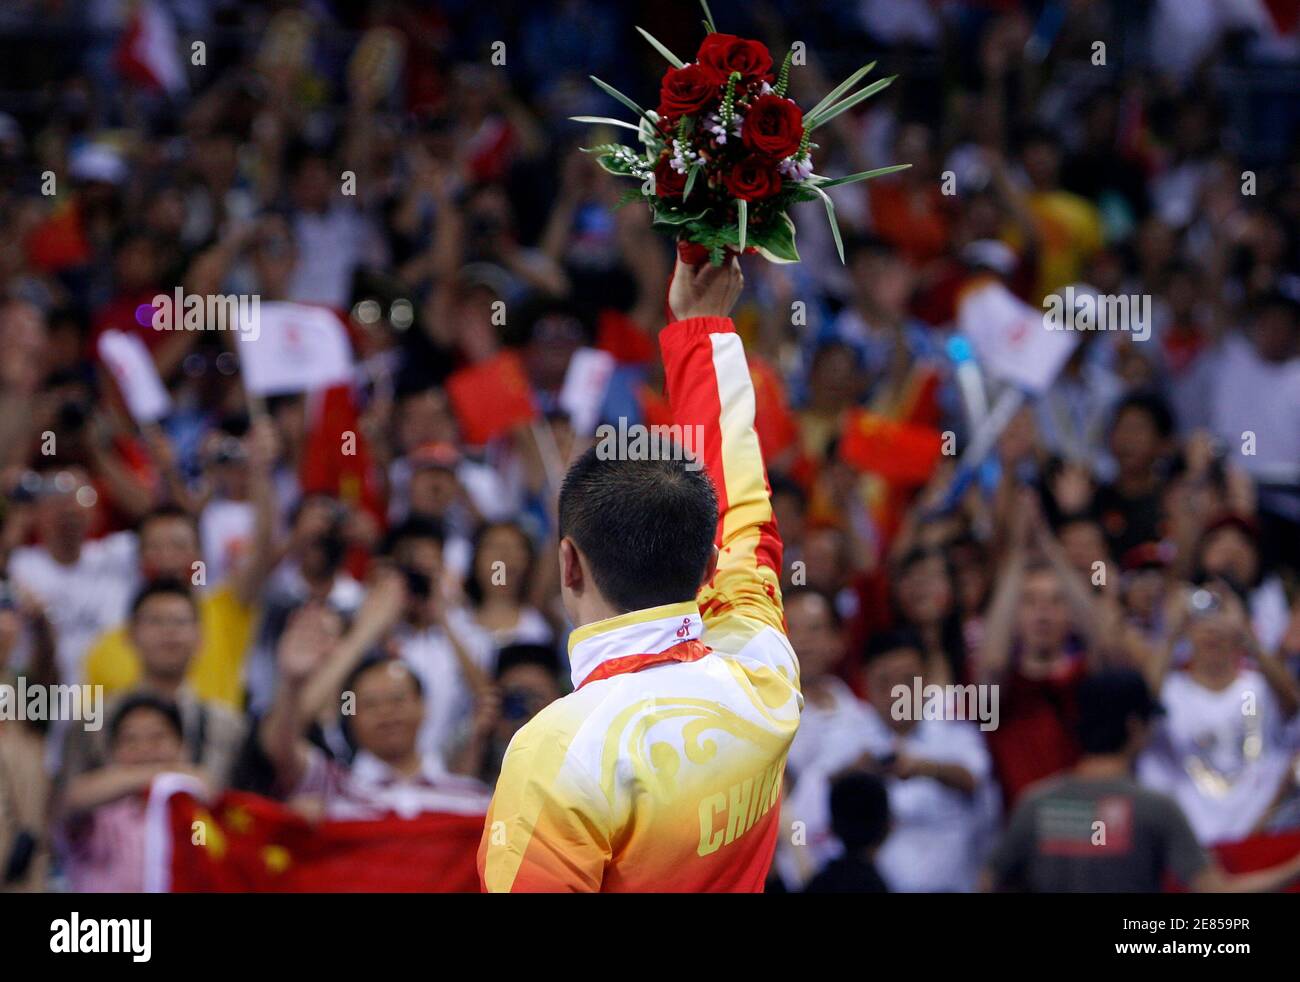 Gold medallist Ma Lin of China celebrates on the podium after the men's singles table tennis competition at the Beijing 2008 Olympic Games August 23, 2008.     REUTERS/Beawiharta (CHINA) Stock Photo